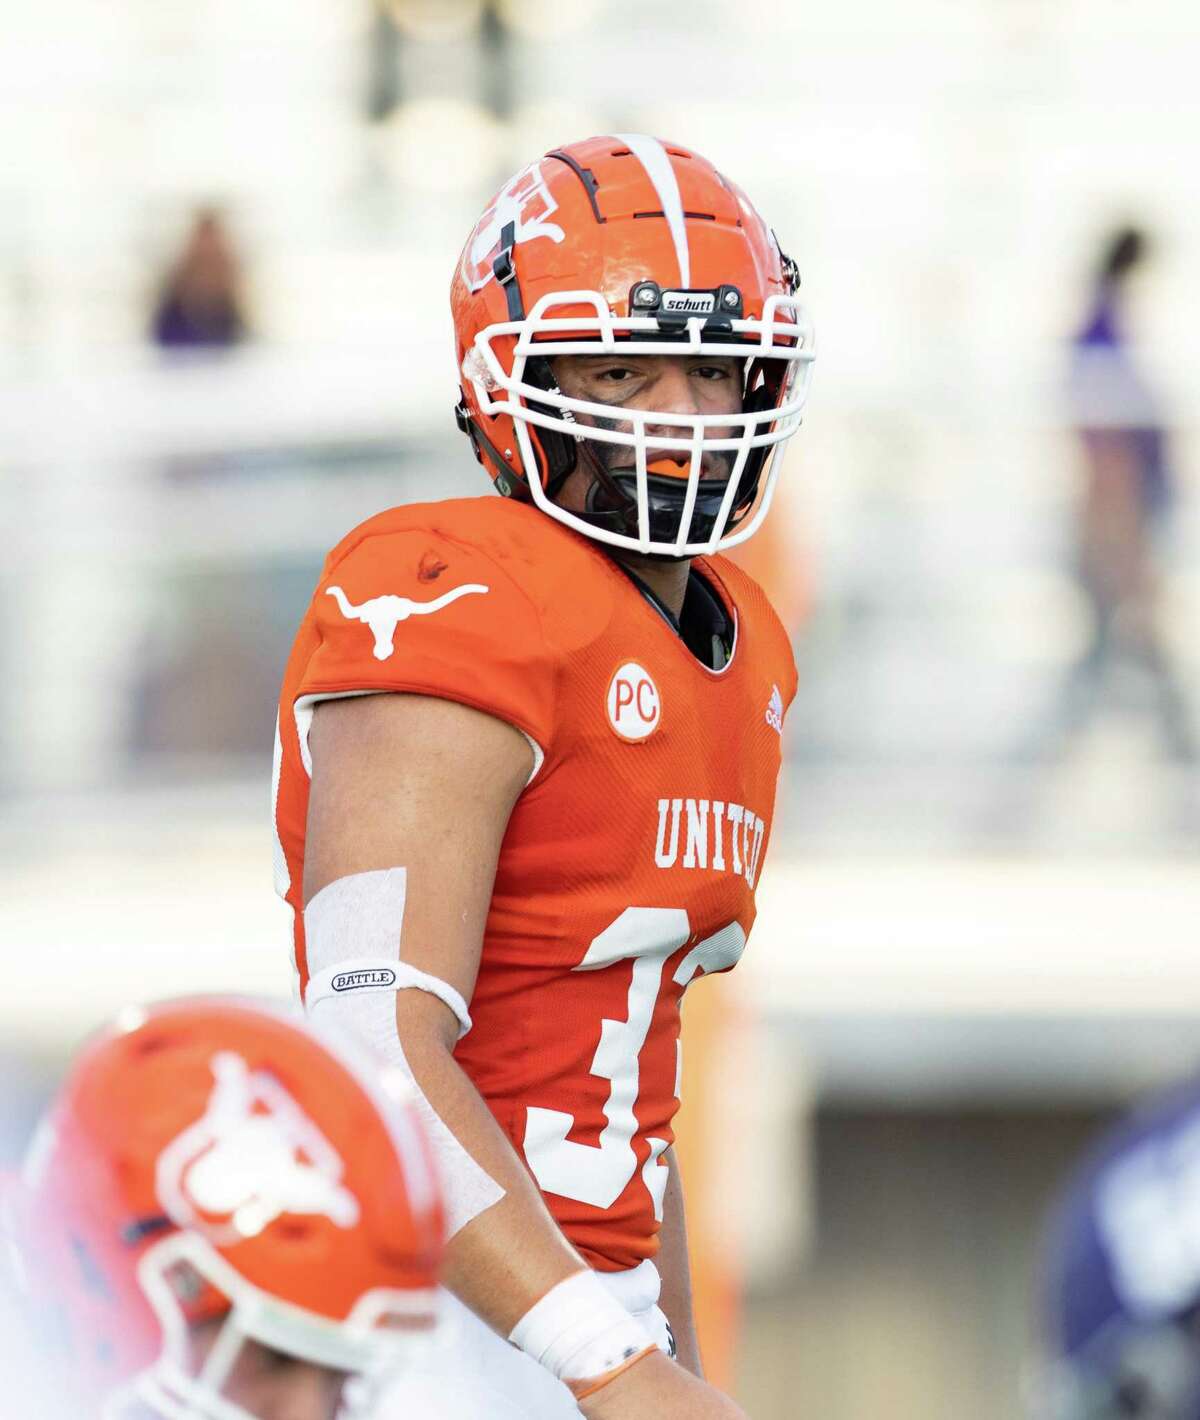 United’s Luis Franco takes pride in playing for the Longhorns.